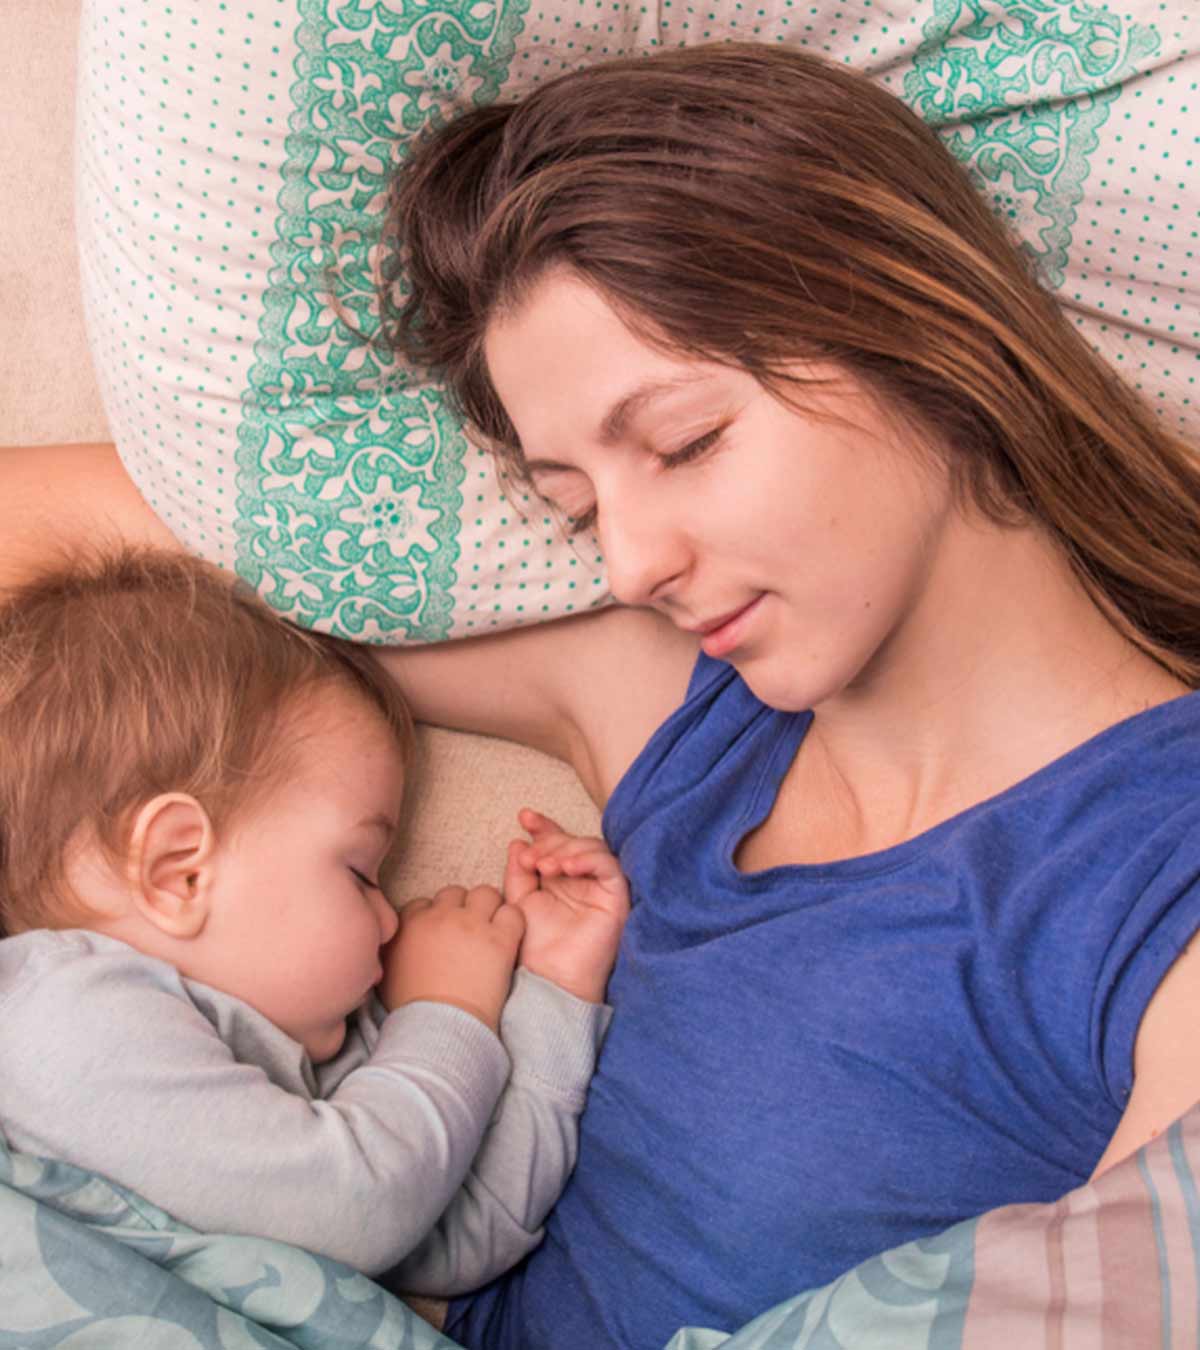 8 Things That Will Happen When Parents Co-Sleep With Their Toddler